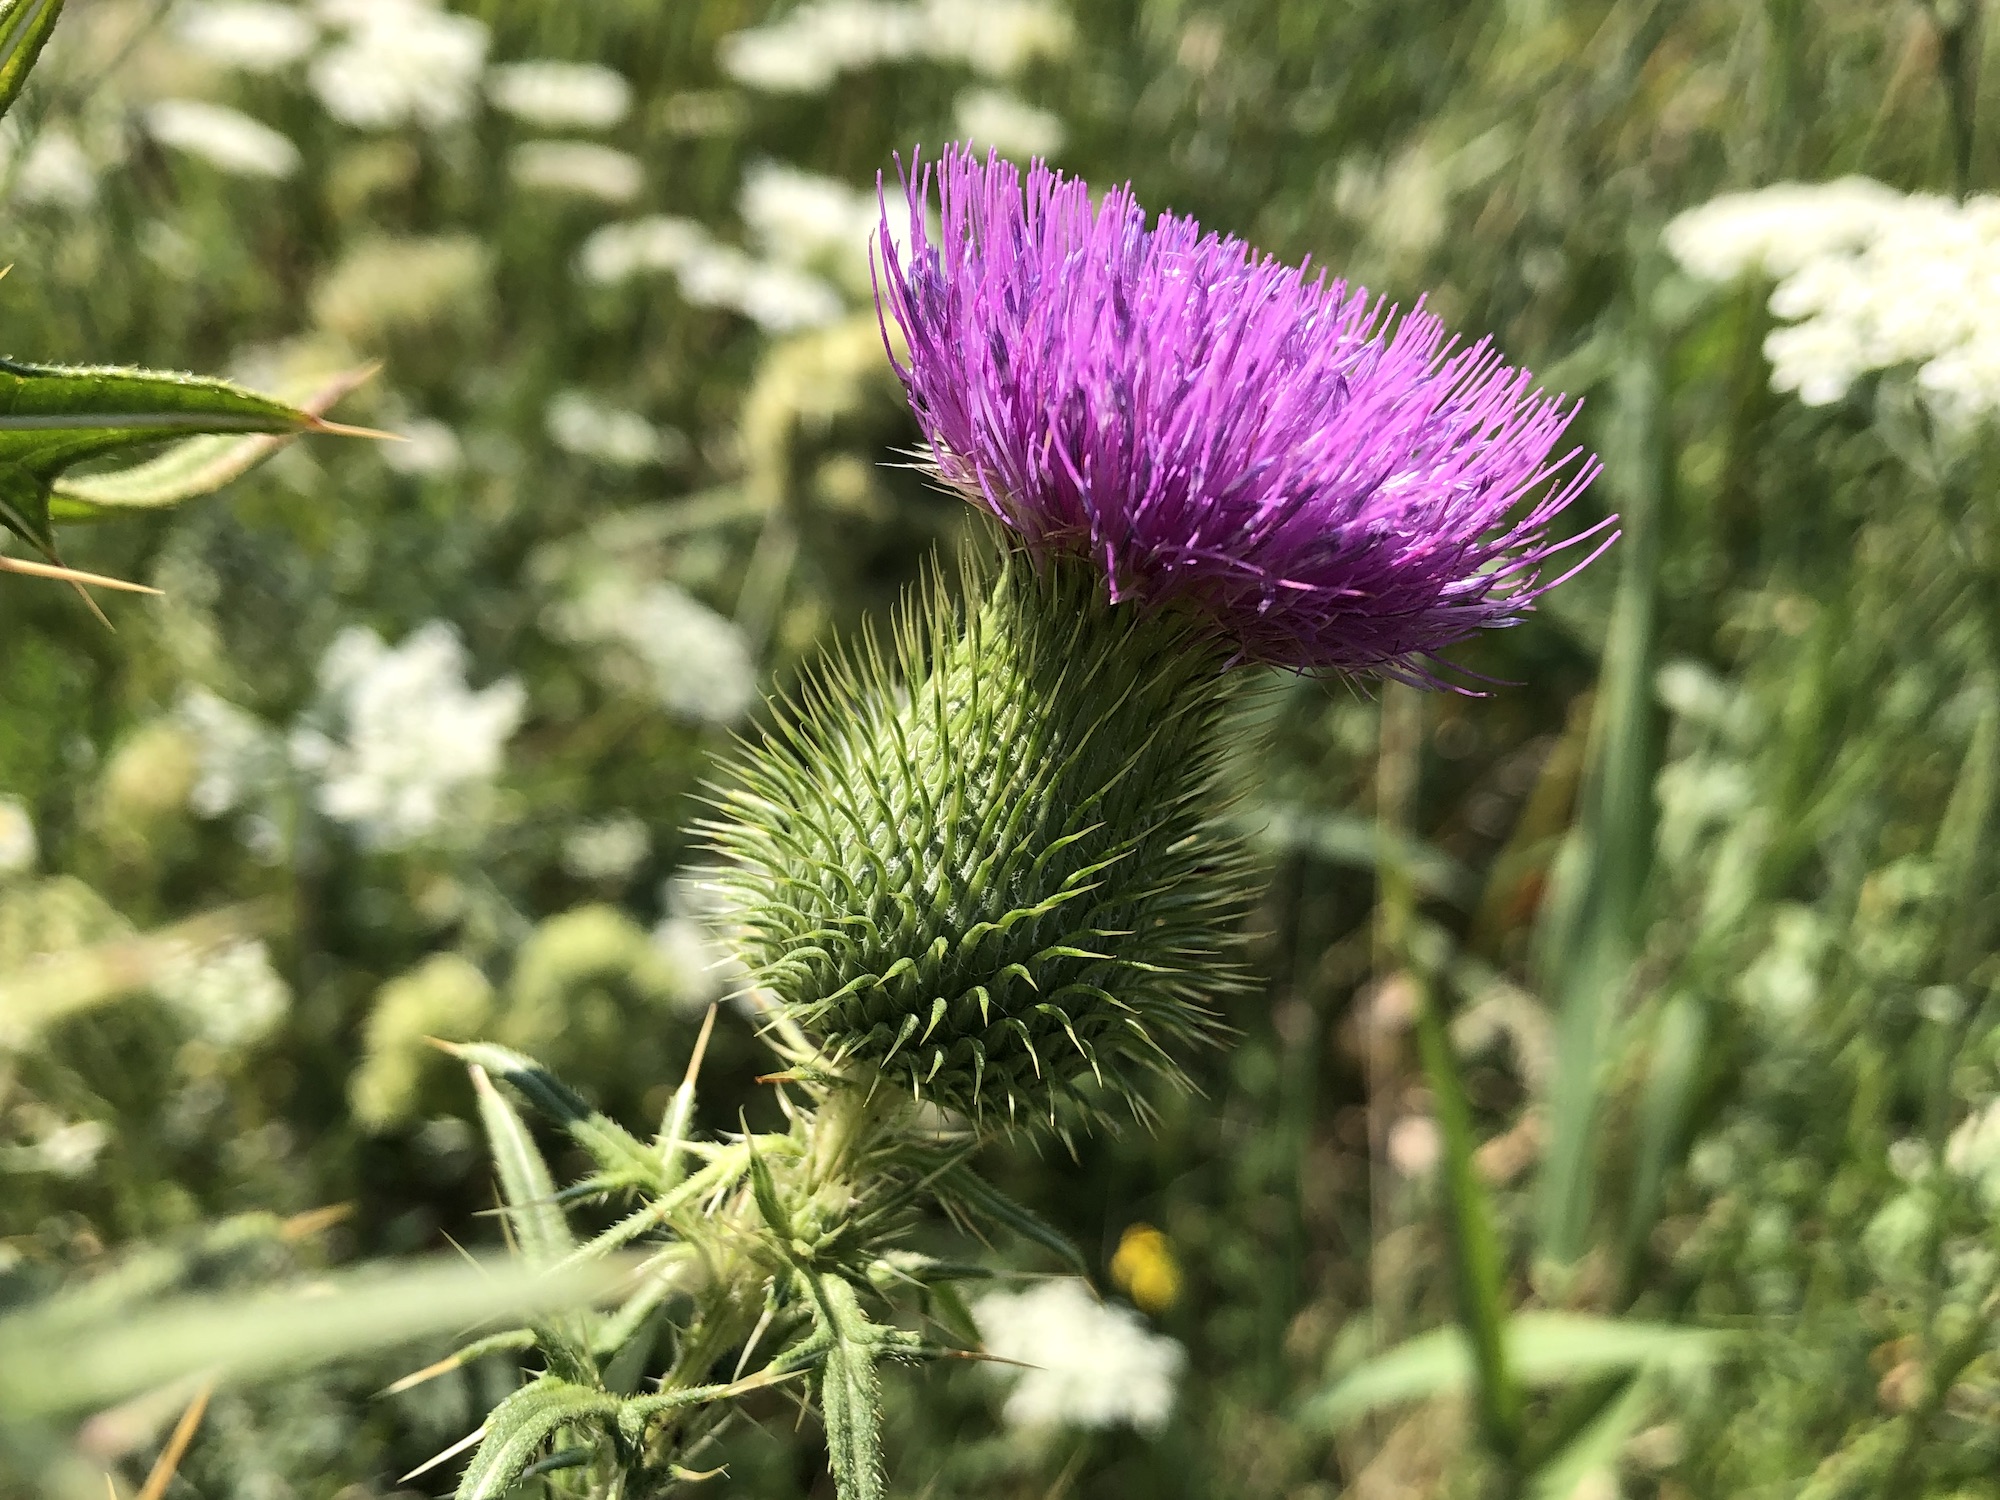 Bull Thistle stalk and leaves growing in field near the Westside Community Farmer's Market on University Row in  Madison, Wisconsin on August 2, 2022.